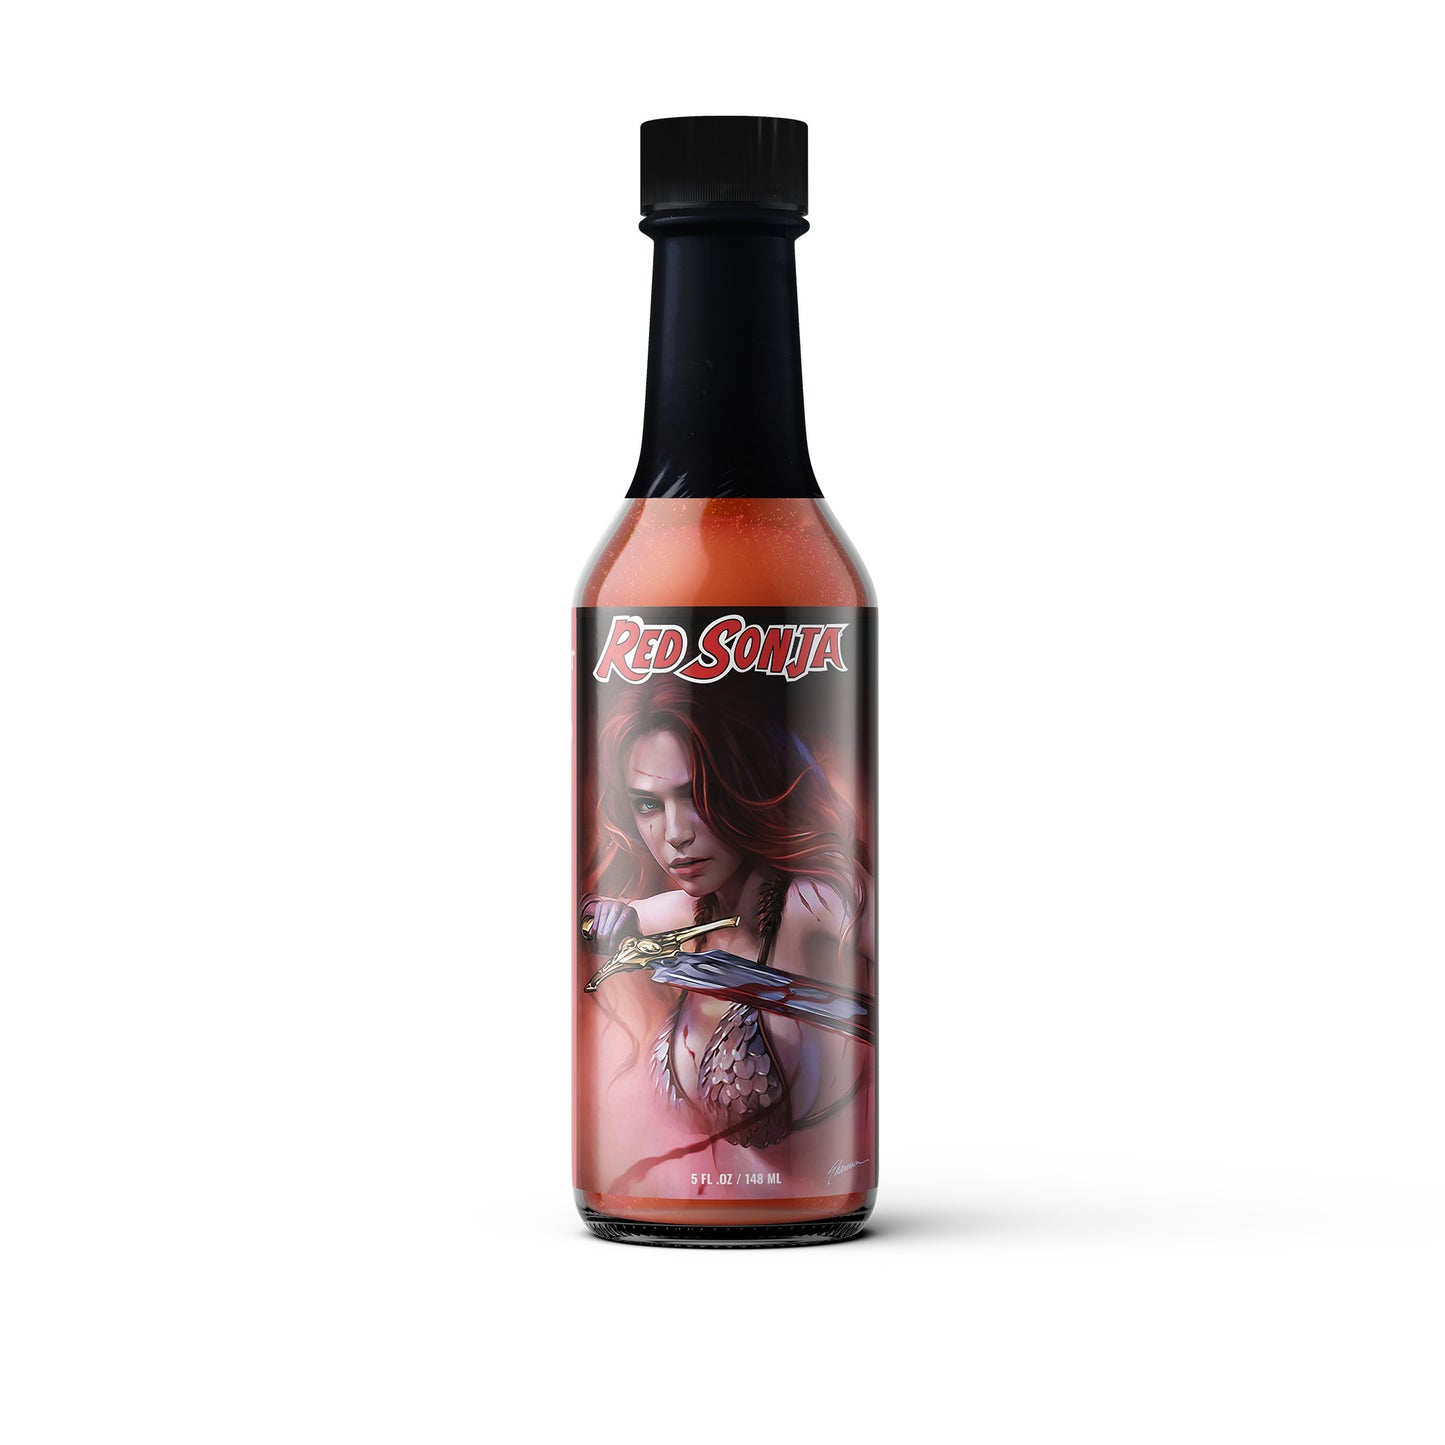 Red Sonja : Ghost Pepper Hot Sauce